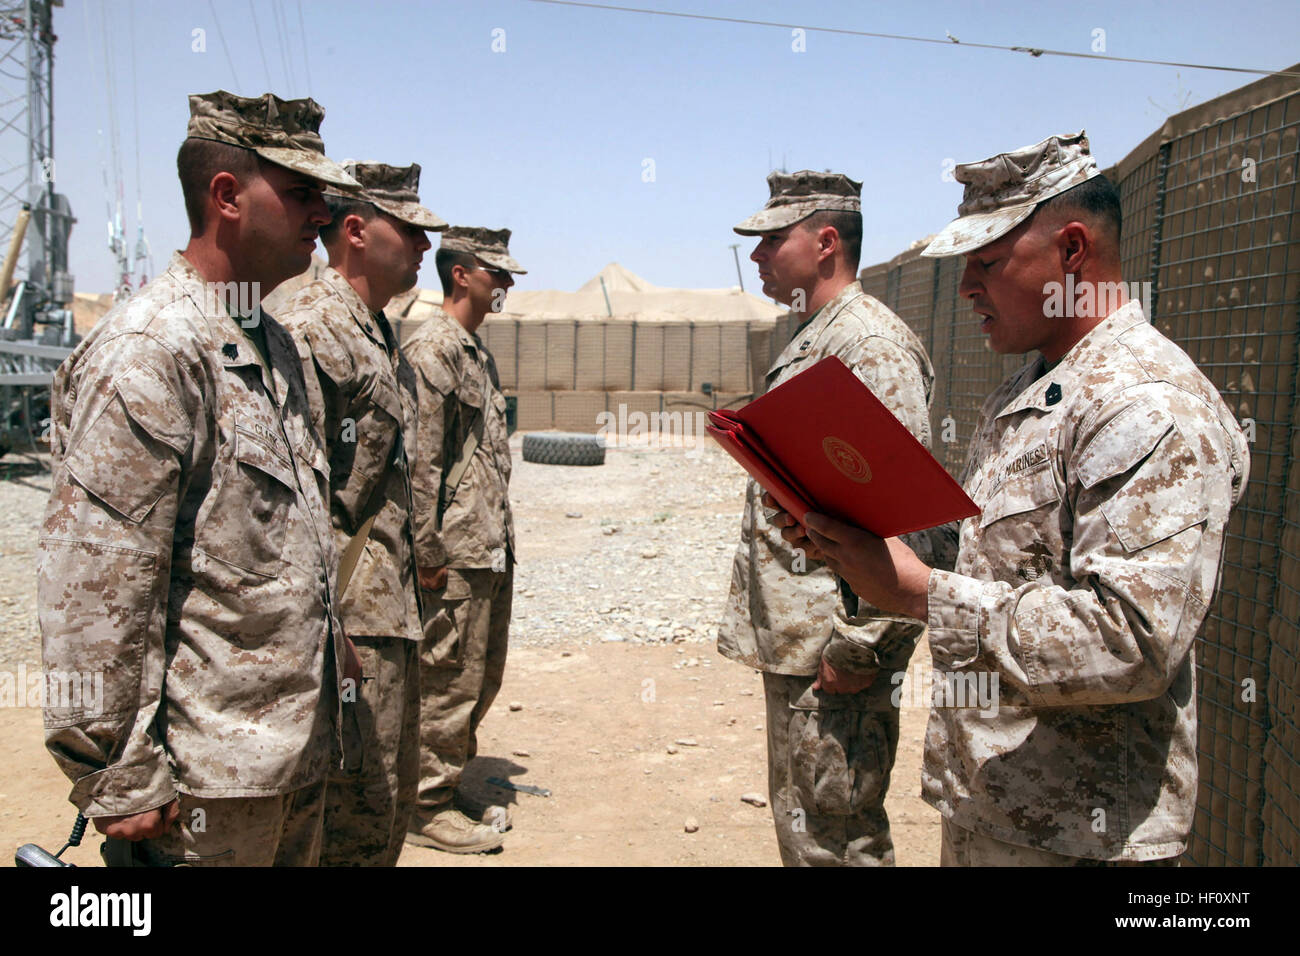 U.S. Marine Corps 1st Sgt. Roberto Alviso, front right, with Fox Company, 2nd Battalion, 5th Marine Regiment, Regimental Combat Team 6, reads a Navy and Marine Corps Achievement Medal award certificate on Forward Operating Base Shir Ghazay, Helmand province, Afghanistan July 28, 2012. The award was presented to Sgt. Brain Clark for the superior performance of his duties while serving as a Police Sergeant. (U.S. Marine Corps photo by Lance Cpl. Ismael E. Ortega/ Released) Awards ceremony on FOB Shir Ghazay 120728-M-RD023-008 Stock Photo